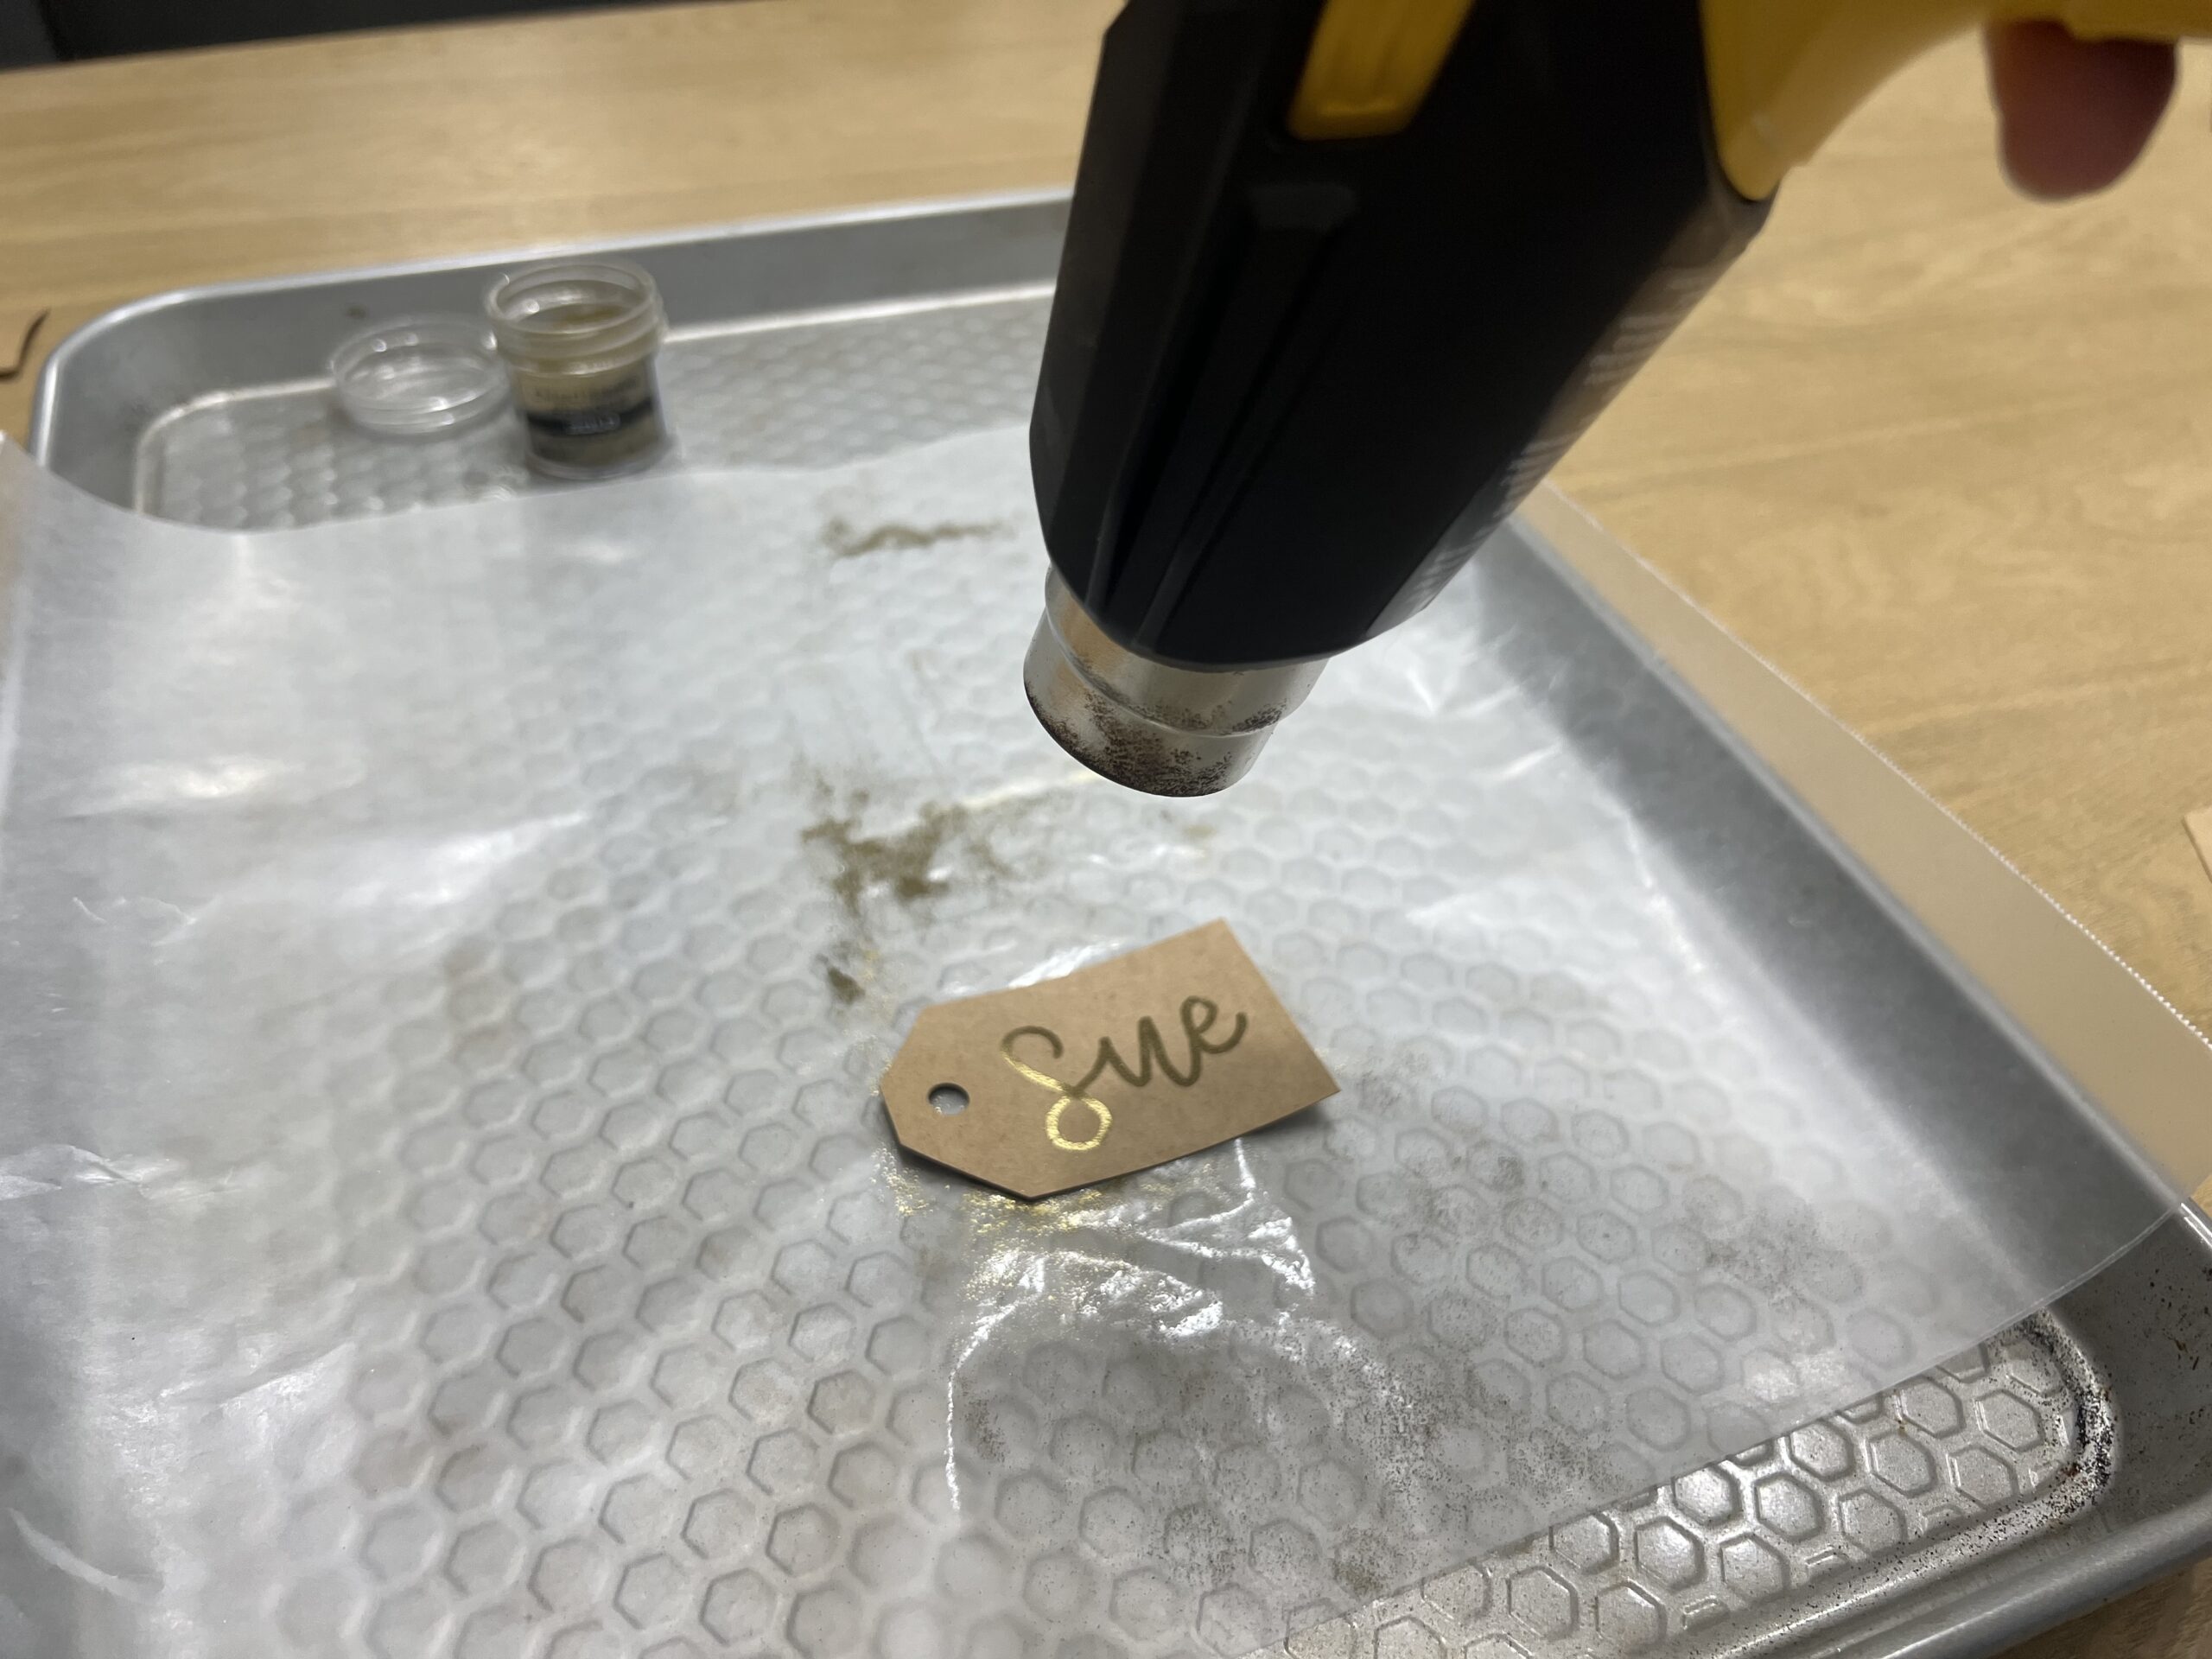 Applying heat to embossed tags with heat gun